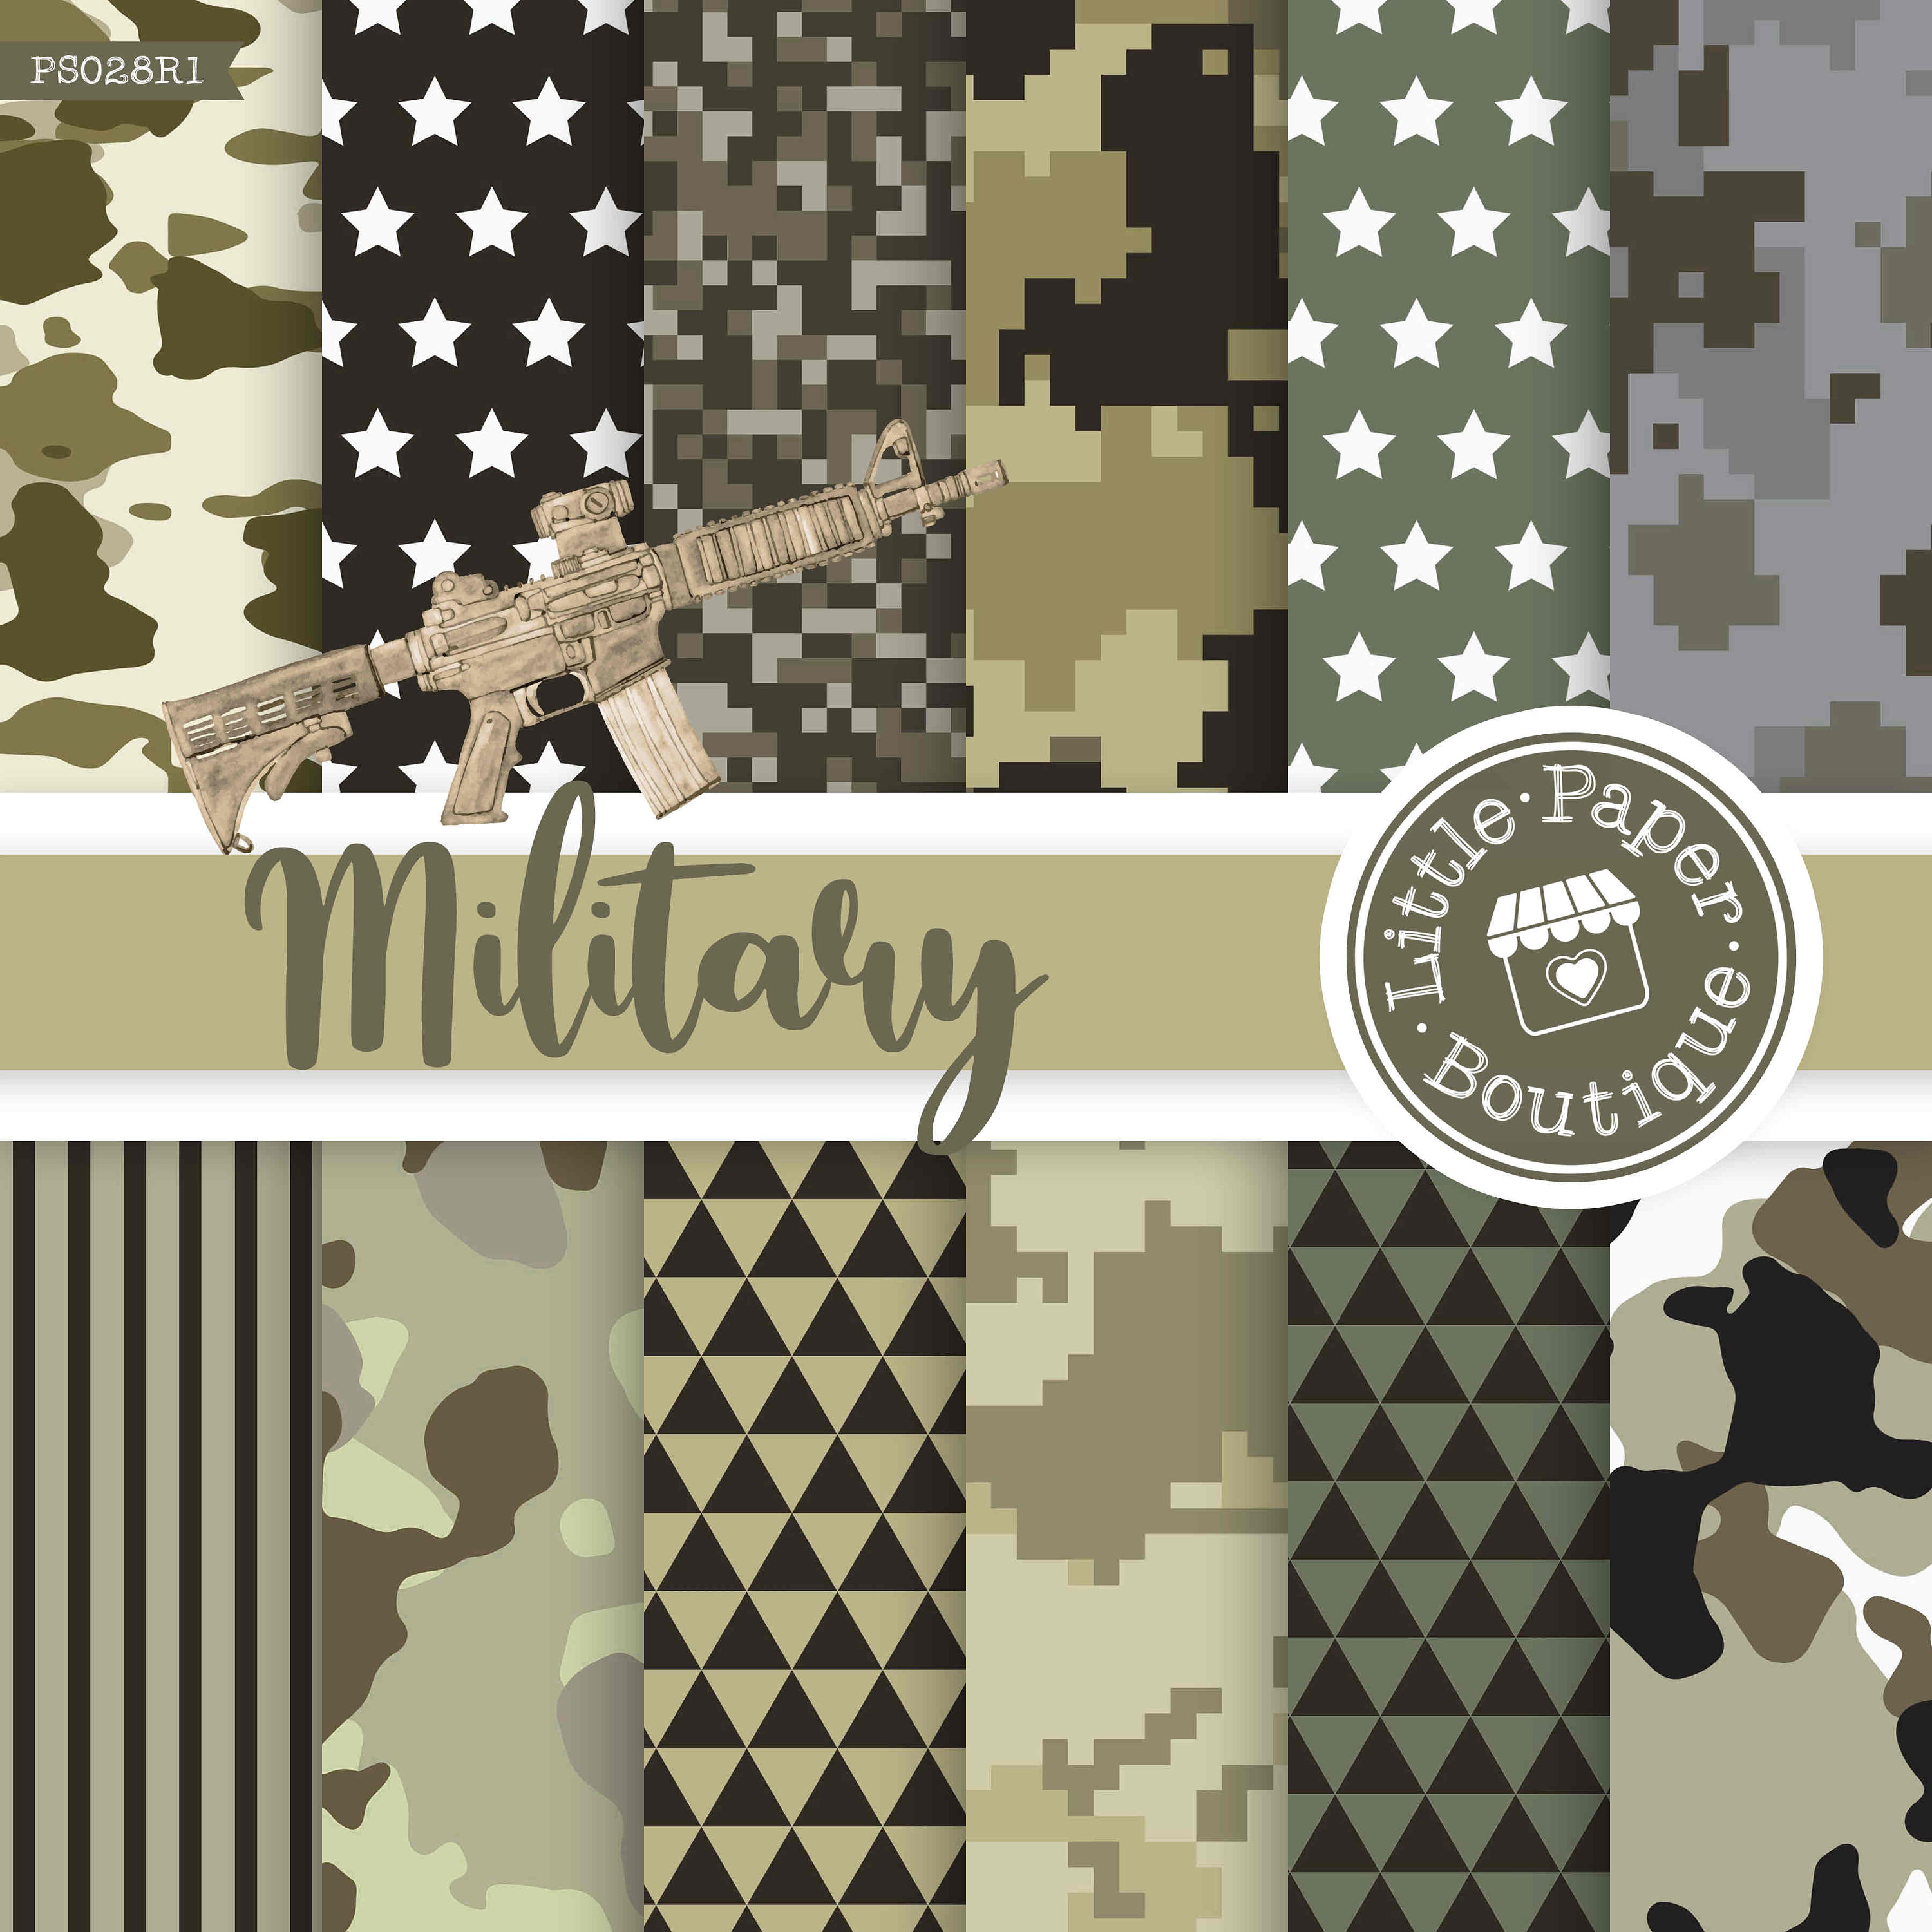 Grey Camo Pattern Poster Size A4 / A3 Camouflage Army Forces